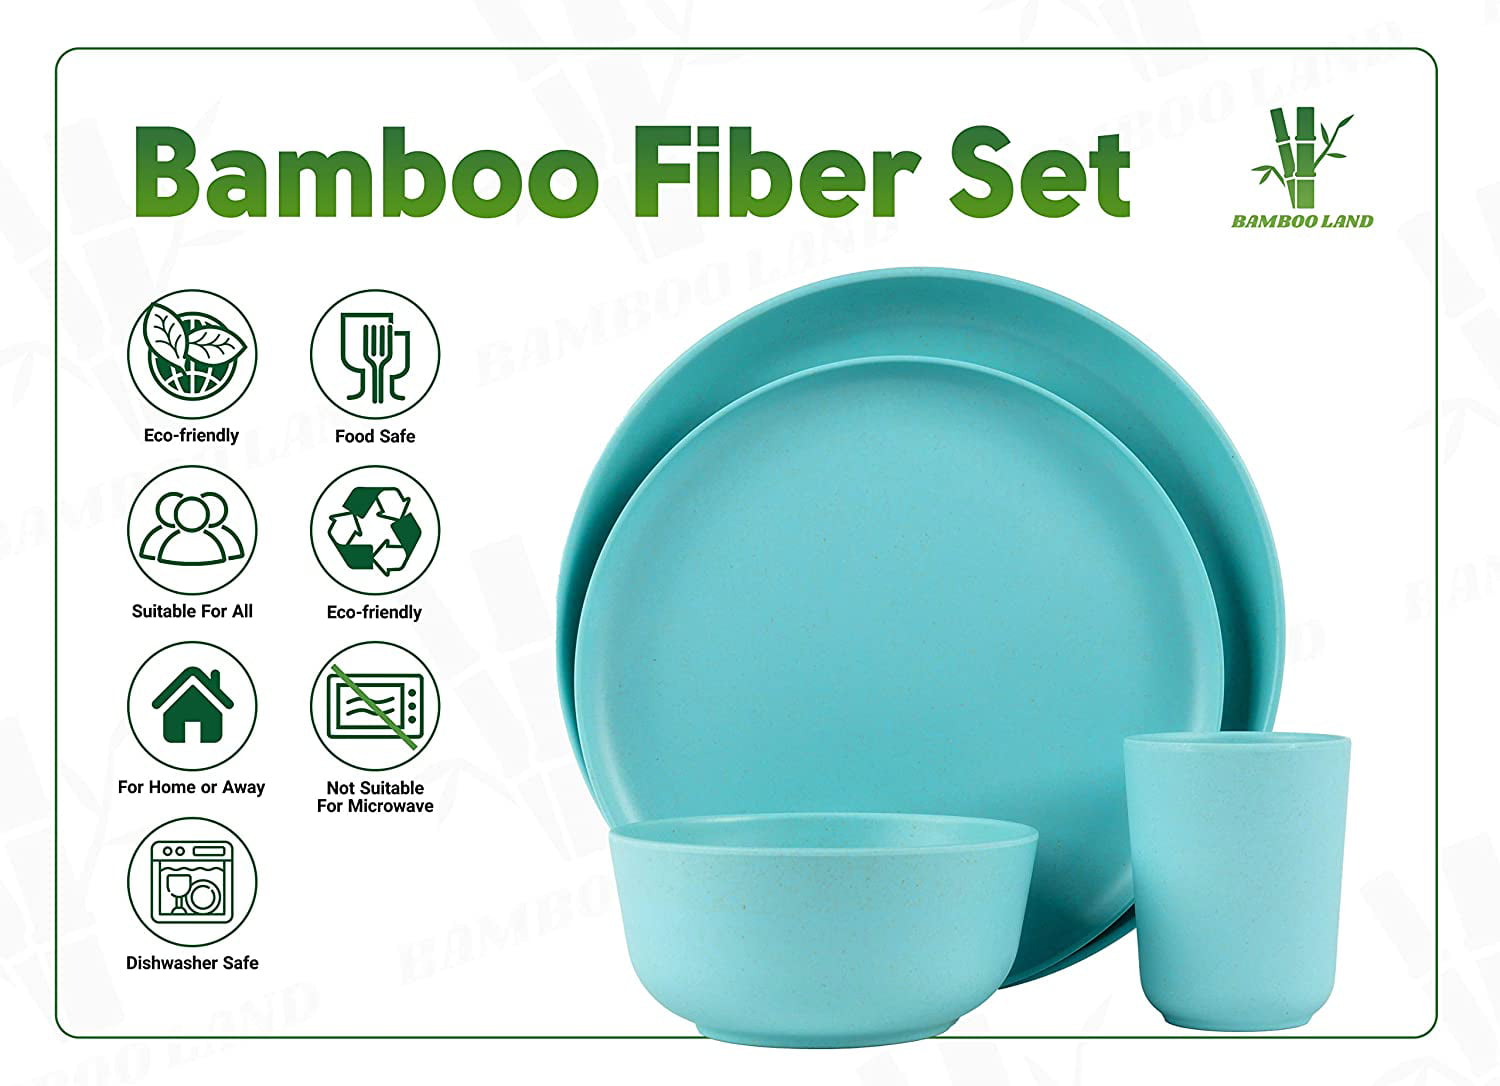 BBQ /bamboo fiber dinnerware dishwasher safe BAMBOO LAND Set for 4 person reusable bamboo dinnerware travel bowl and plate set 16 PCS Wedding gift Blue Picnic Party dorm dishware set 